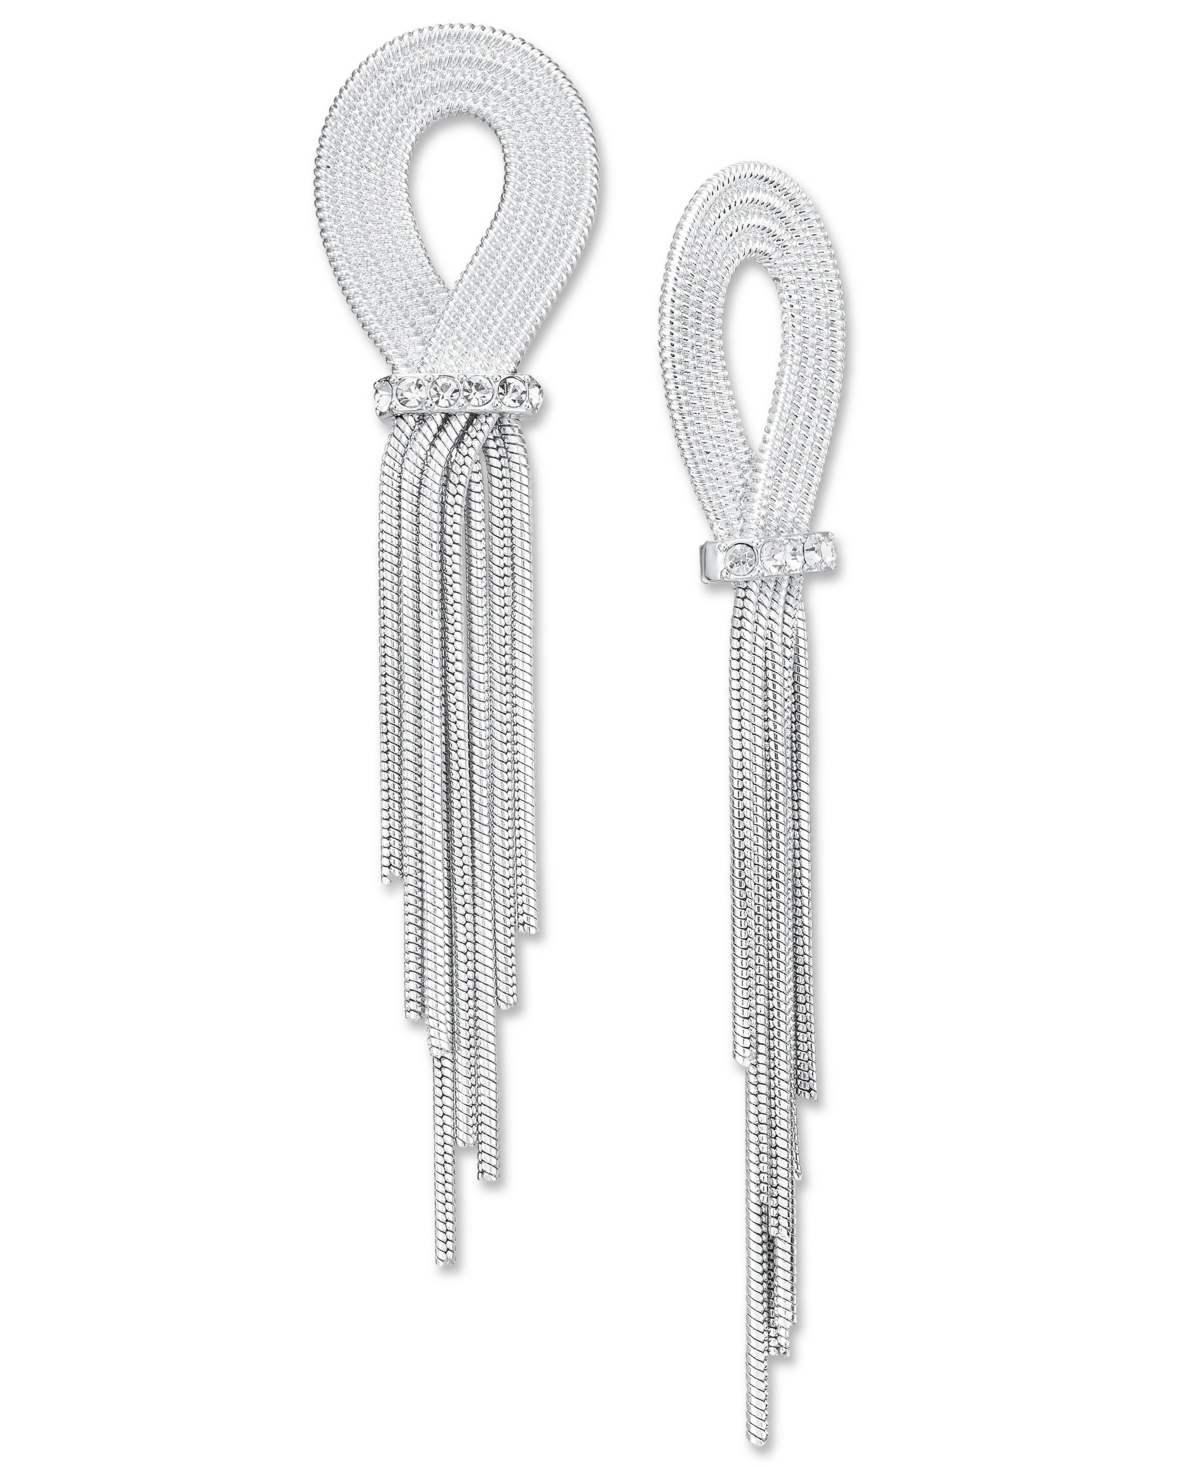 Pave Looped Chain Statement Earrings, Created for Macy's - Silver